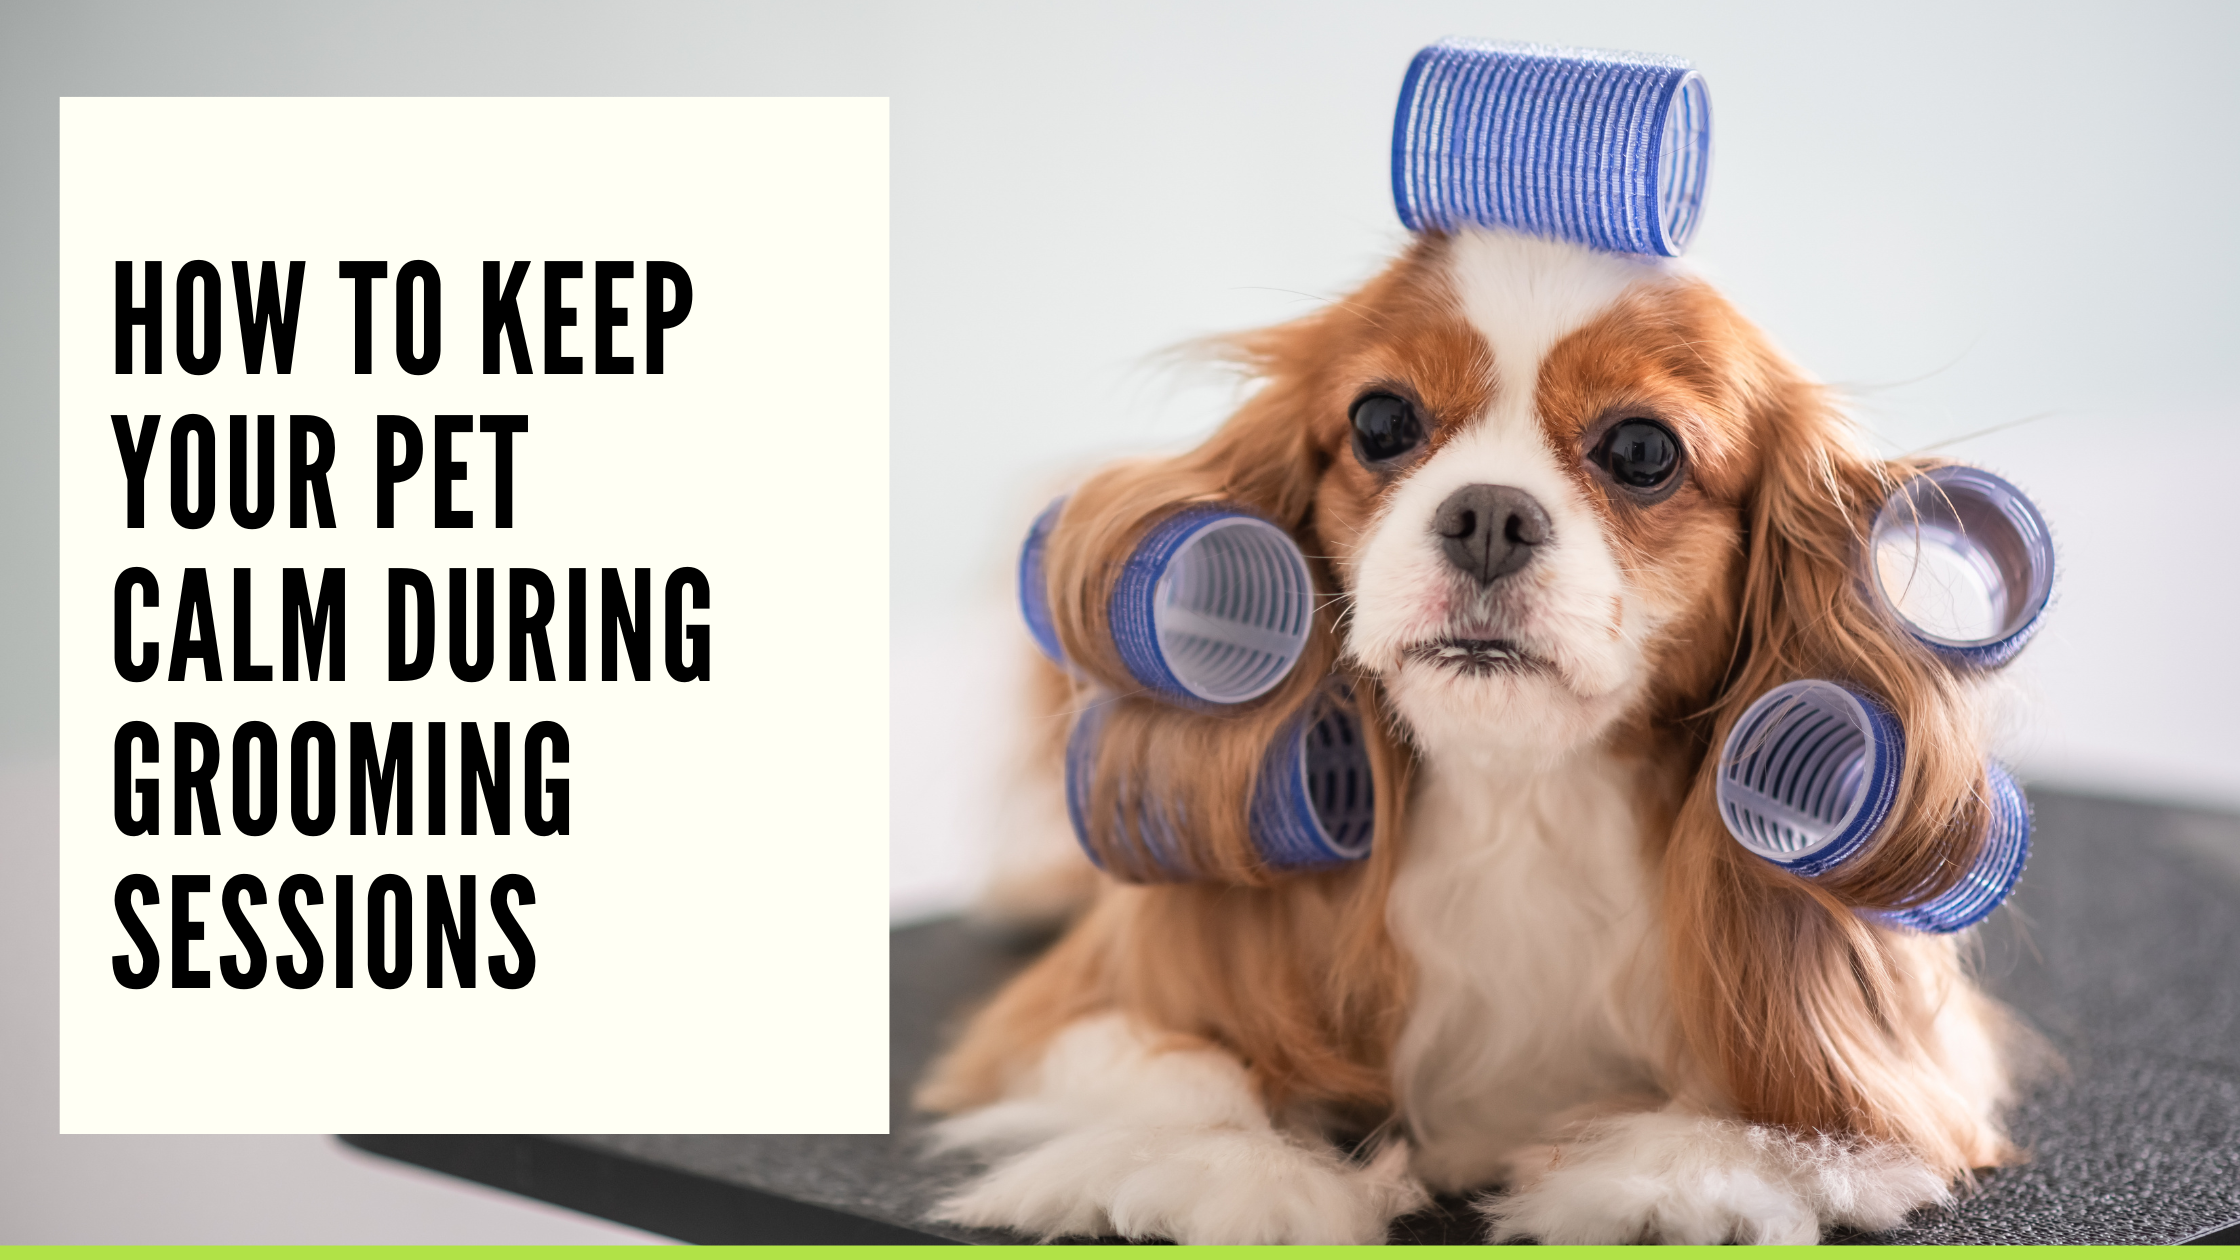 How to Keep Your Pet Calm During Grooming Sessions